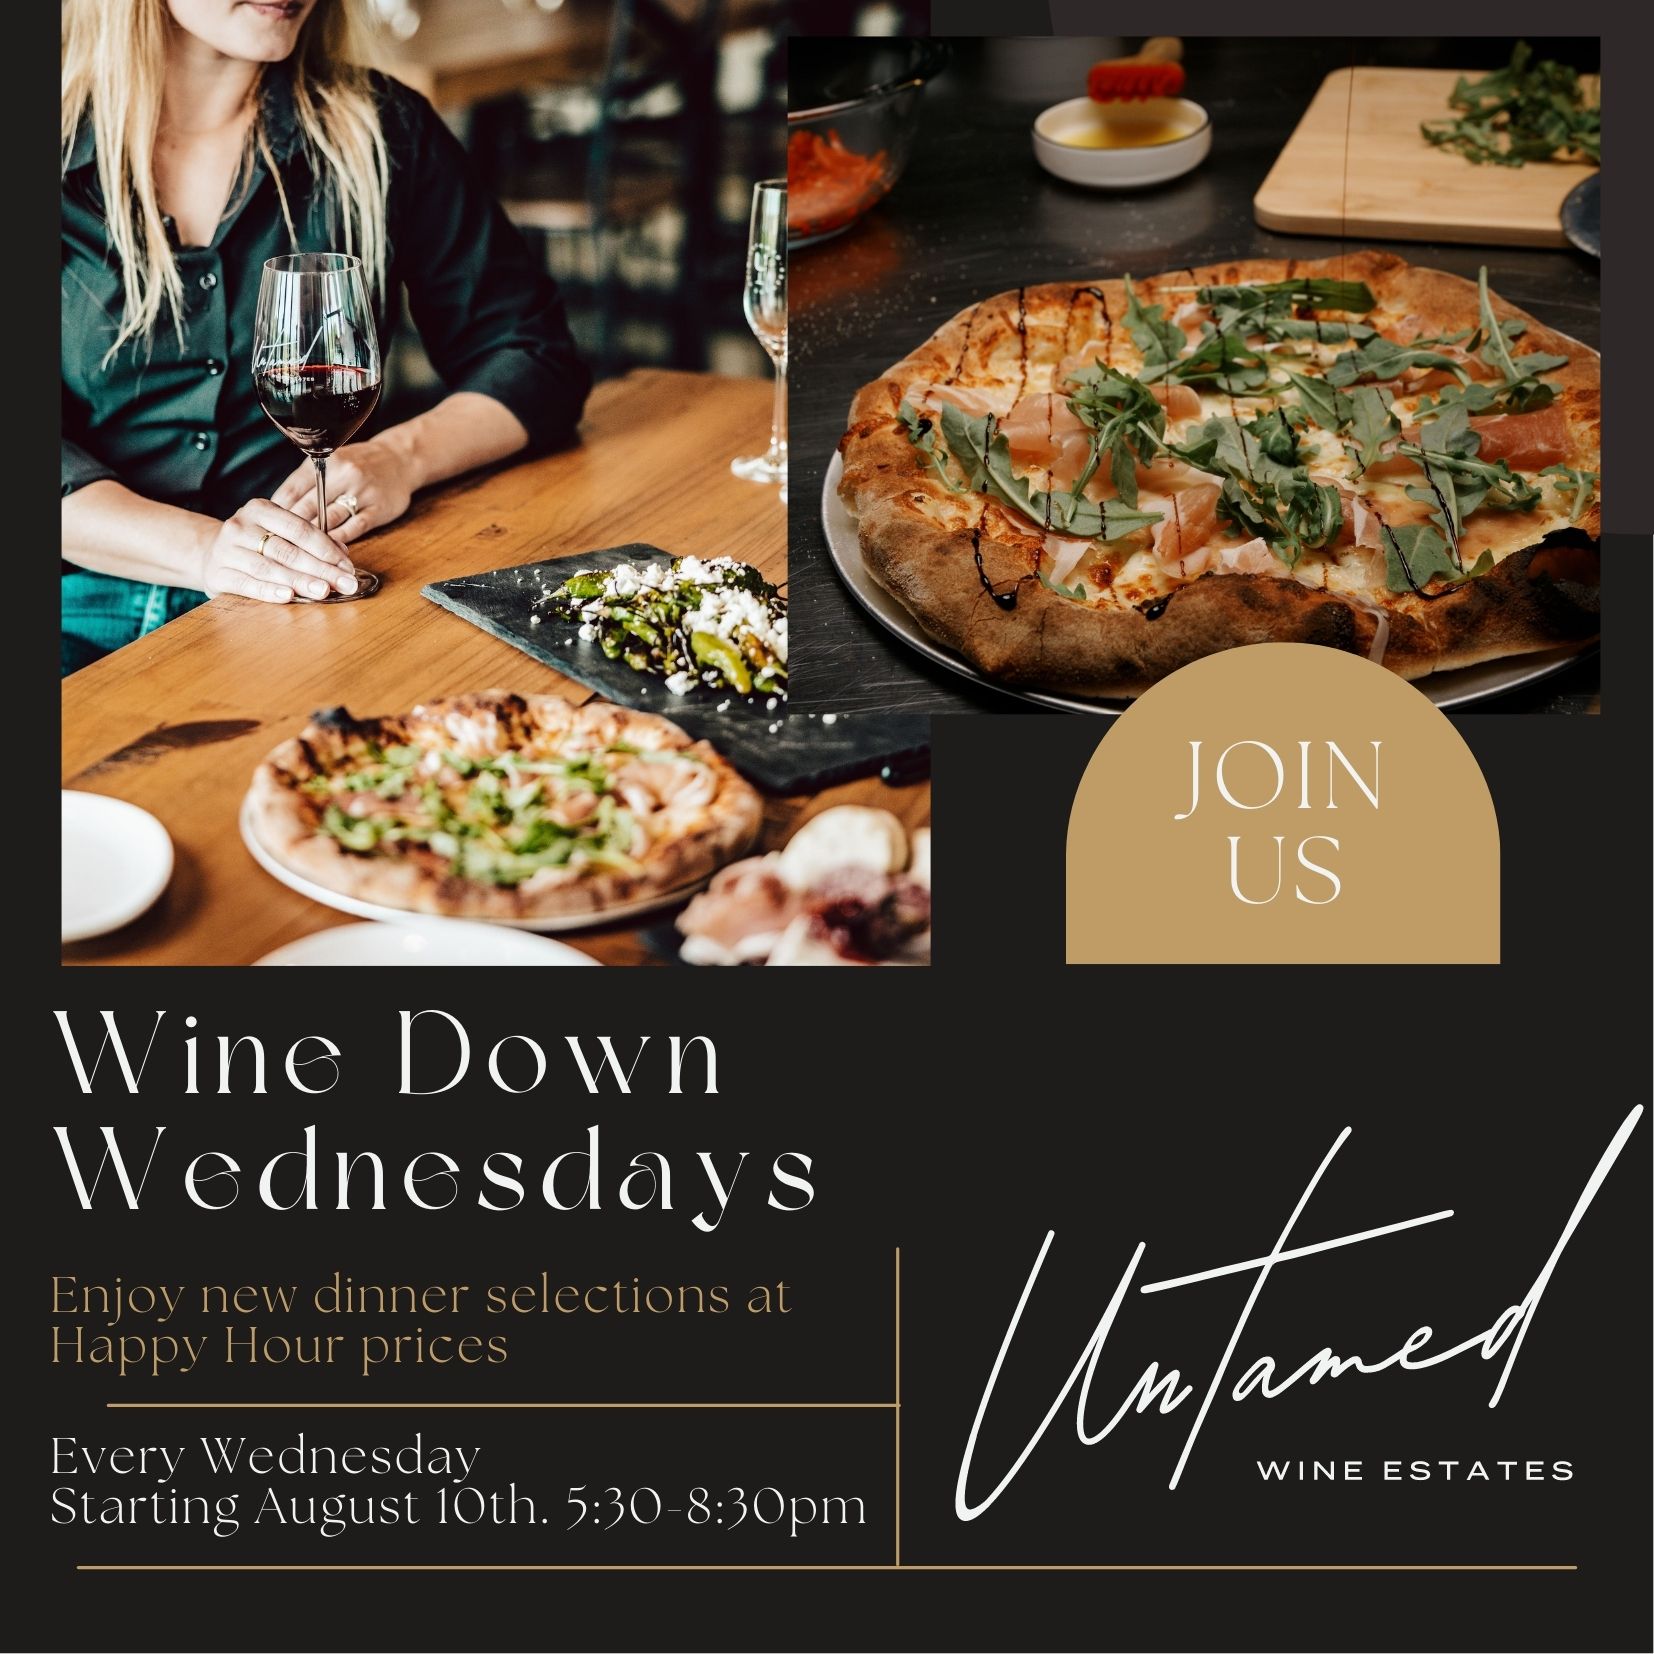 Wine Down Wednesdays Every Wednesday in August. 530-830pm-6